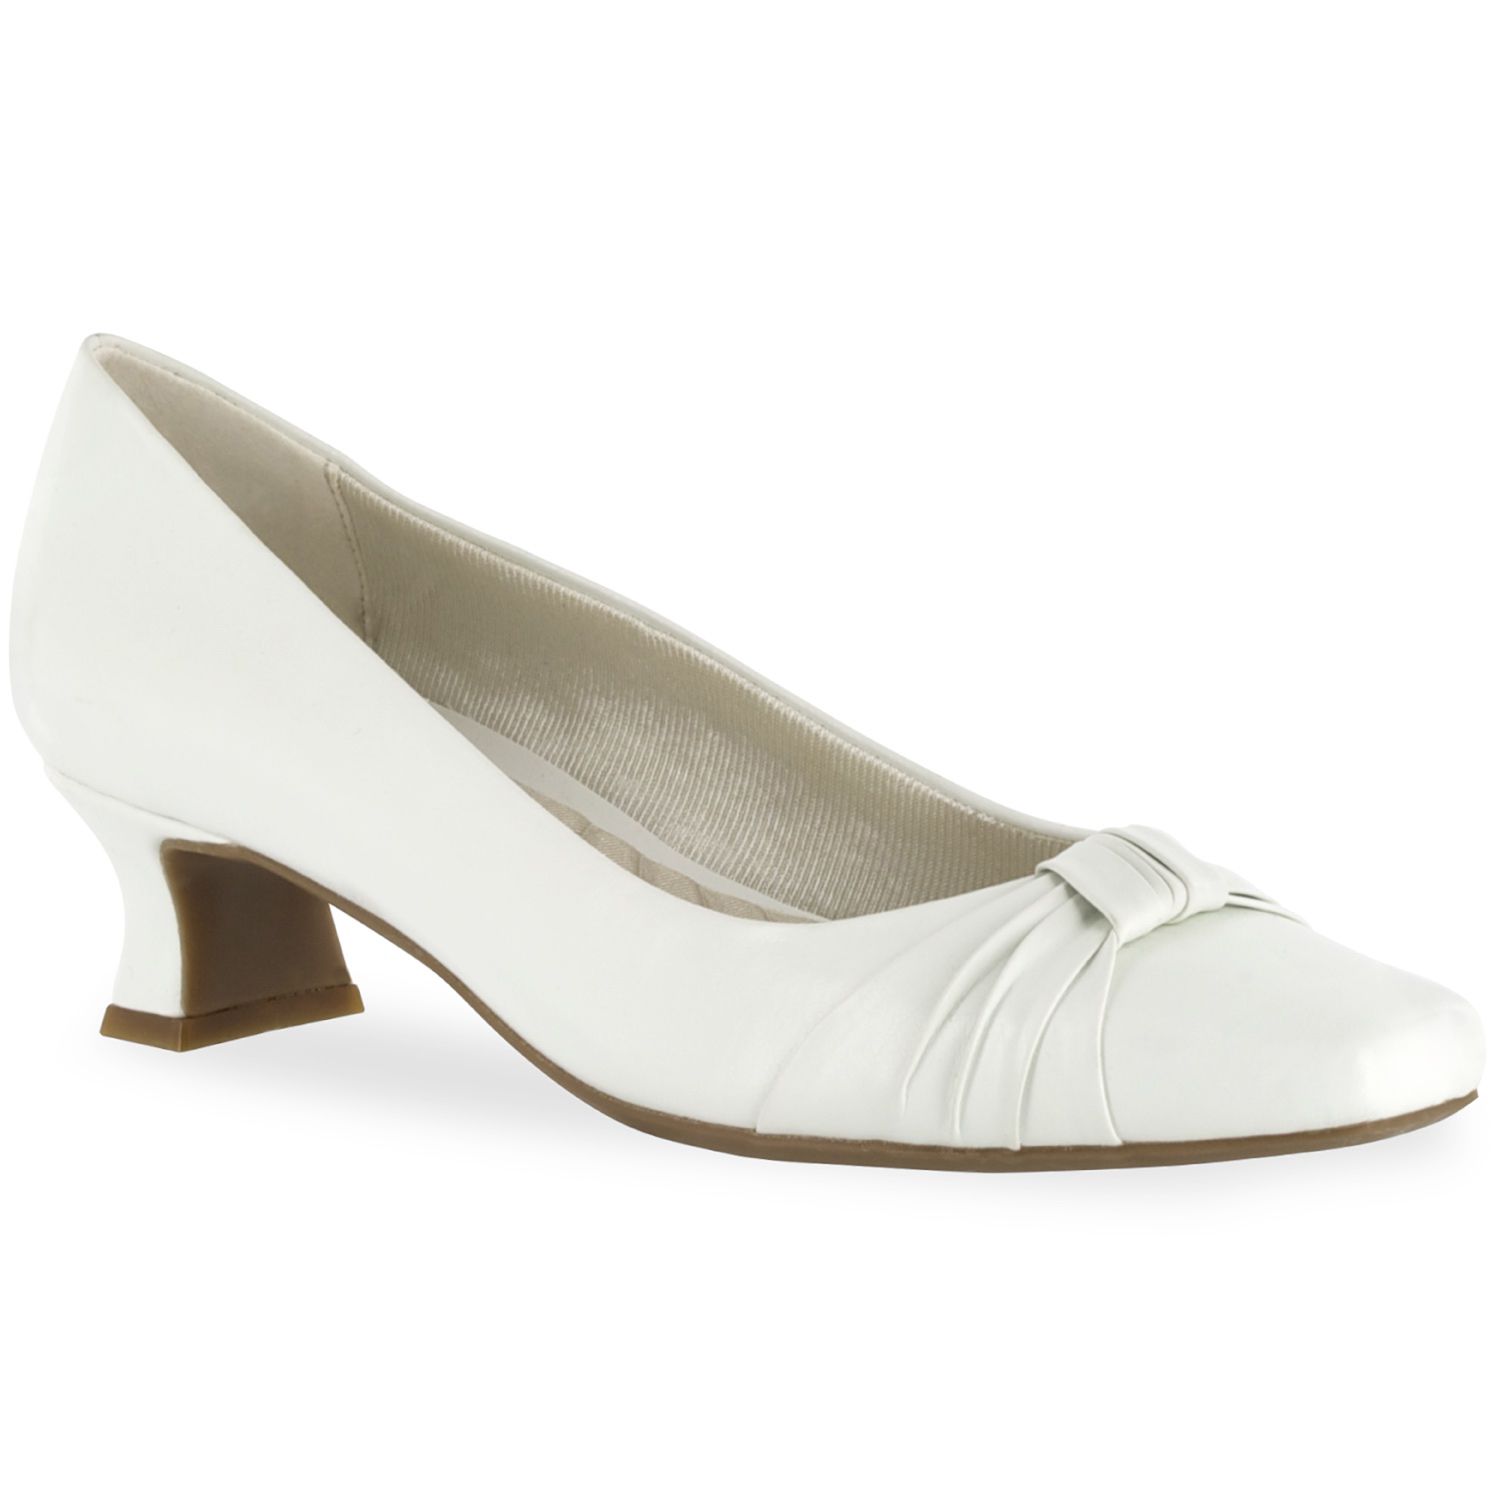 Image for Easy Street Waive Women's Dress Pumps at Kohl's.